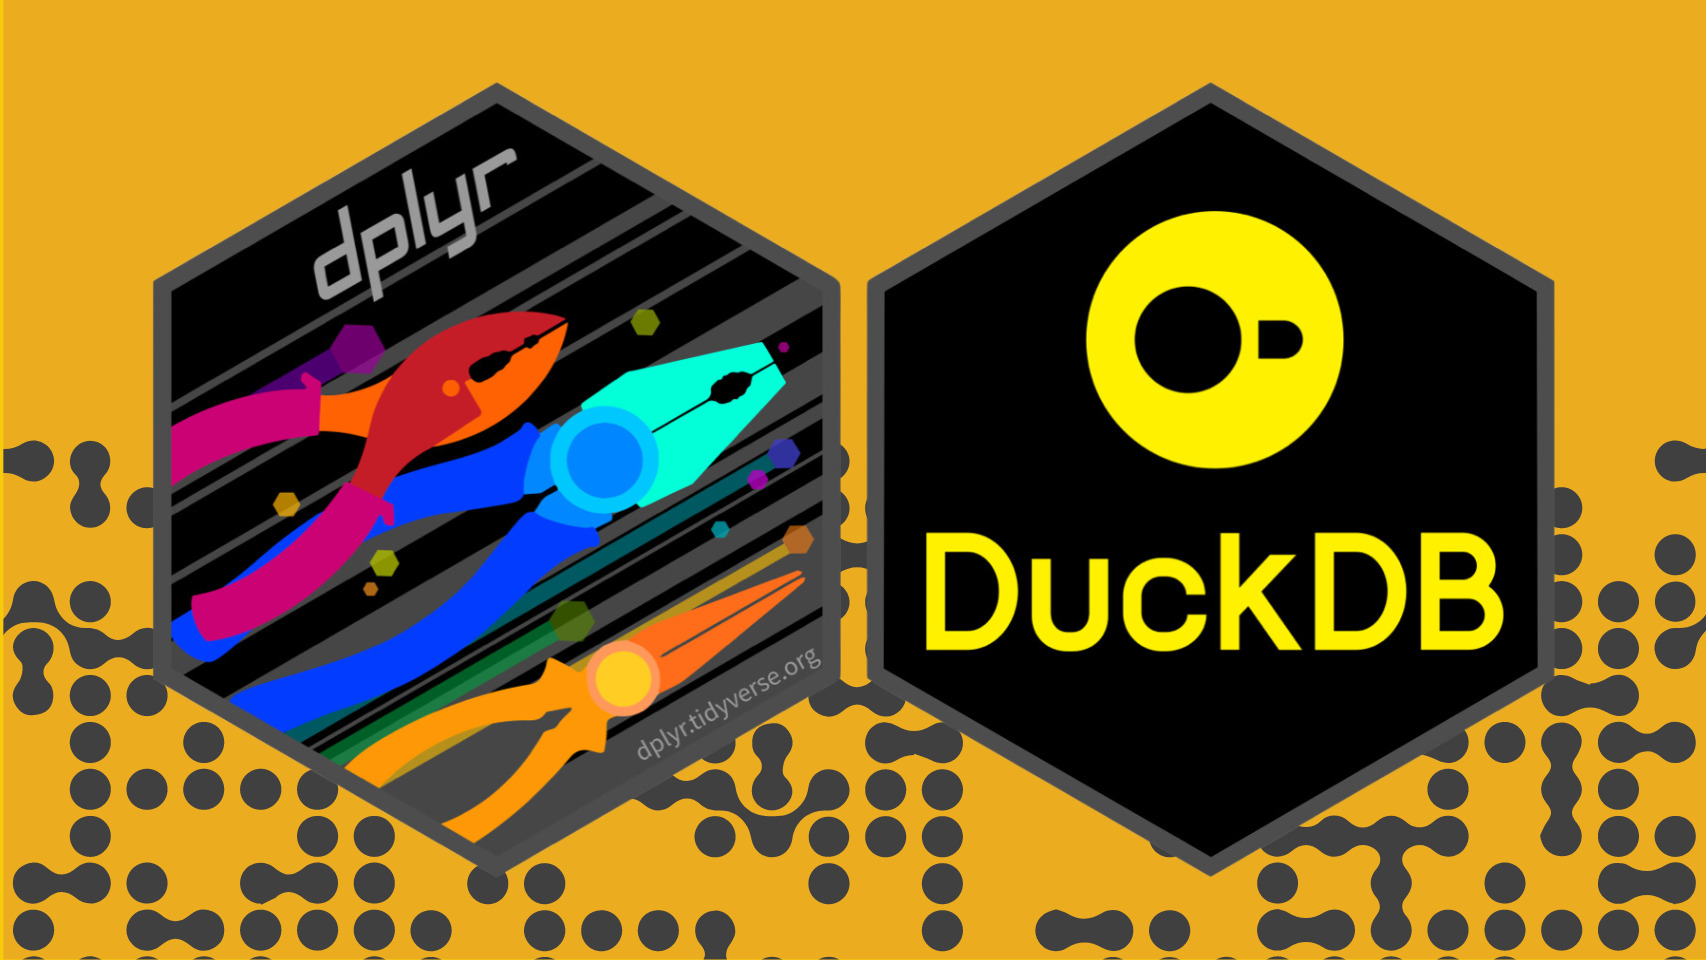 The dplyr and Duck DB logos side by side